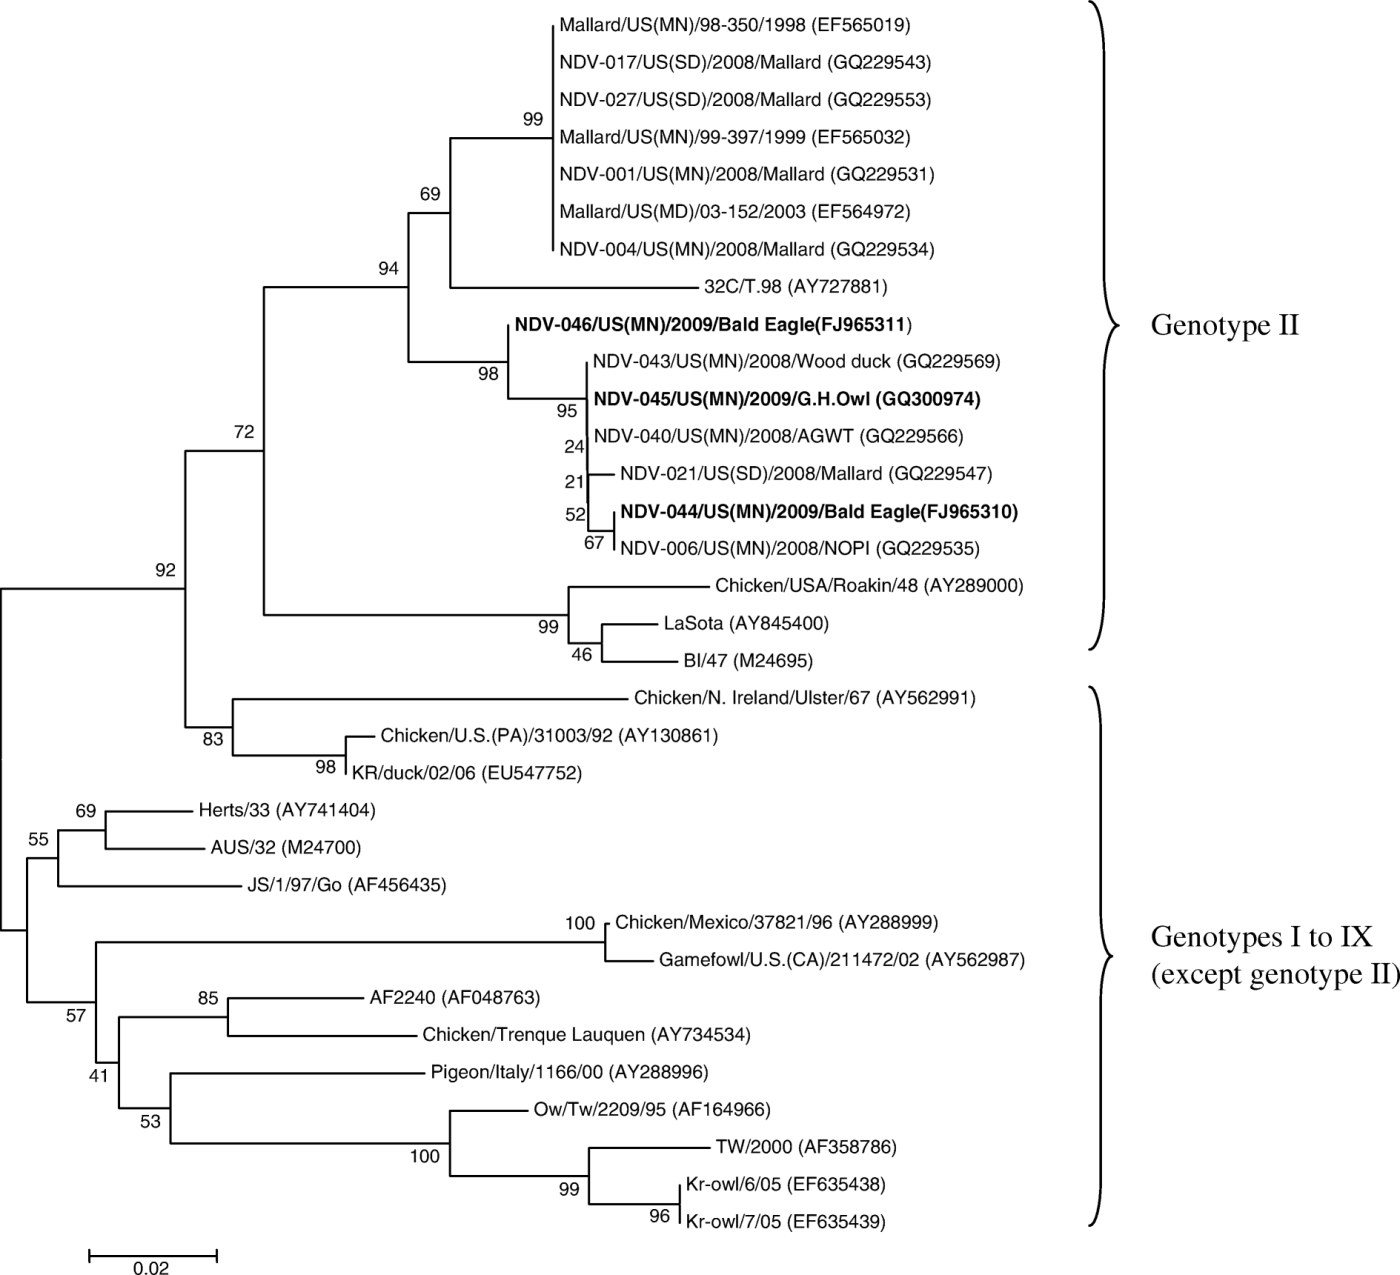 Figure 1.  Phylogenetic tree of the nucleotide sequences of NDV isolates (class II genotypes) based on nucleotides (based on positions 124 to 467 of AY727882) of the coding region of the F gene. GenBank accession numbers are included in parentheses. Strain names from the present study are in bold. Bootstrap values (500 bootstrap replicates) are shown on the tree.